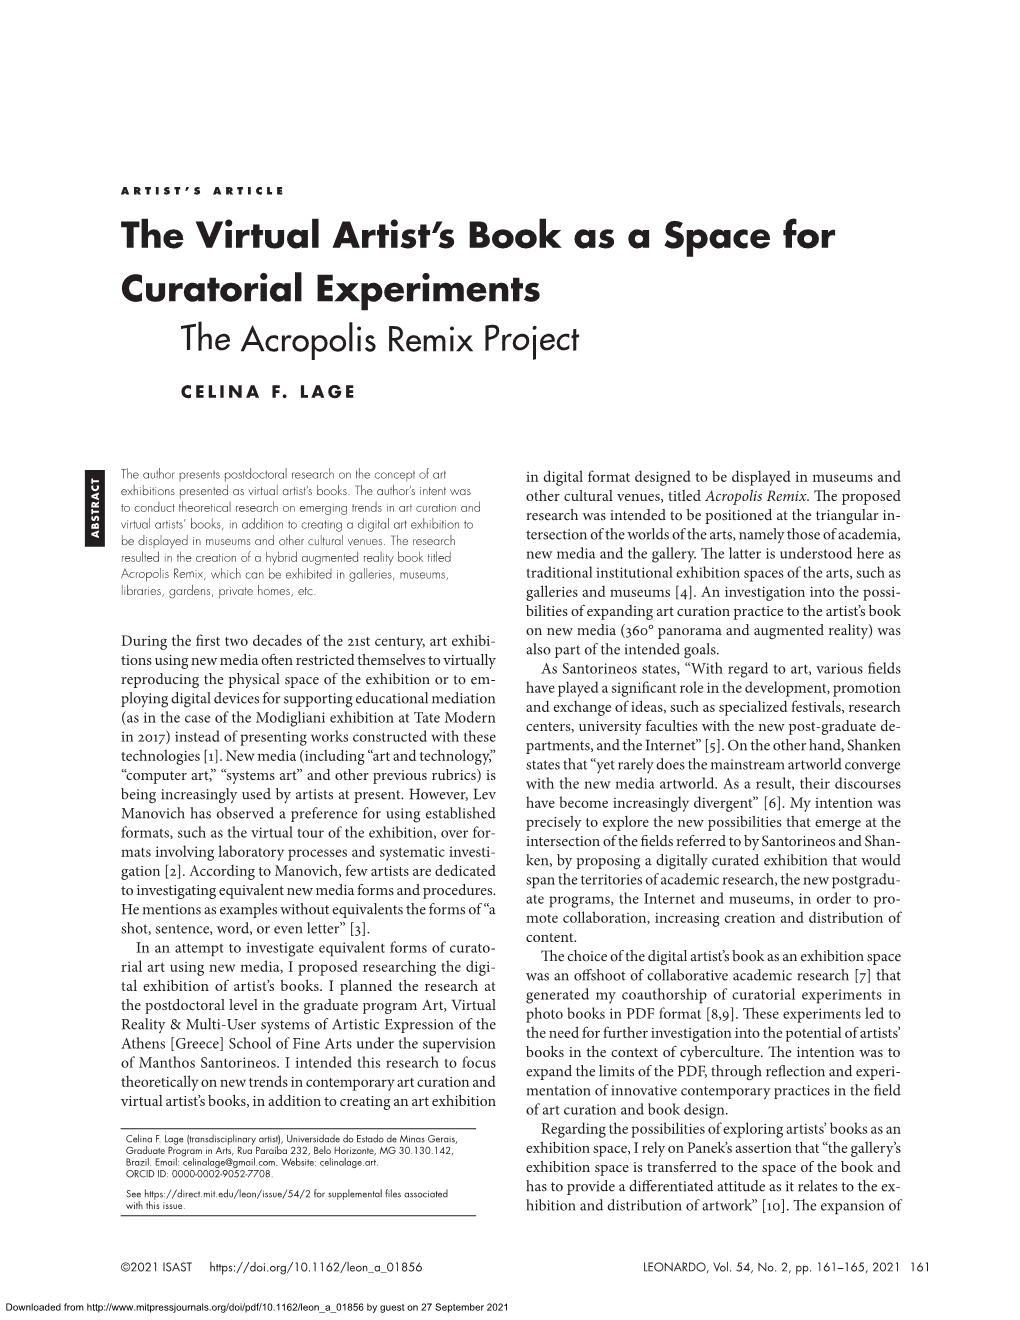 The Virtual Artist's Book As a Space For